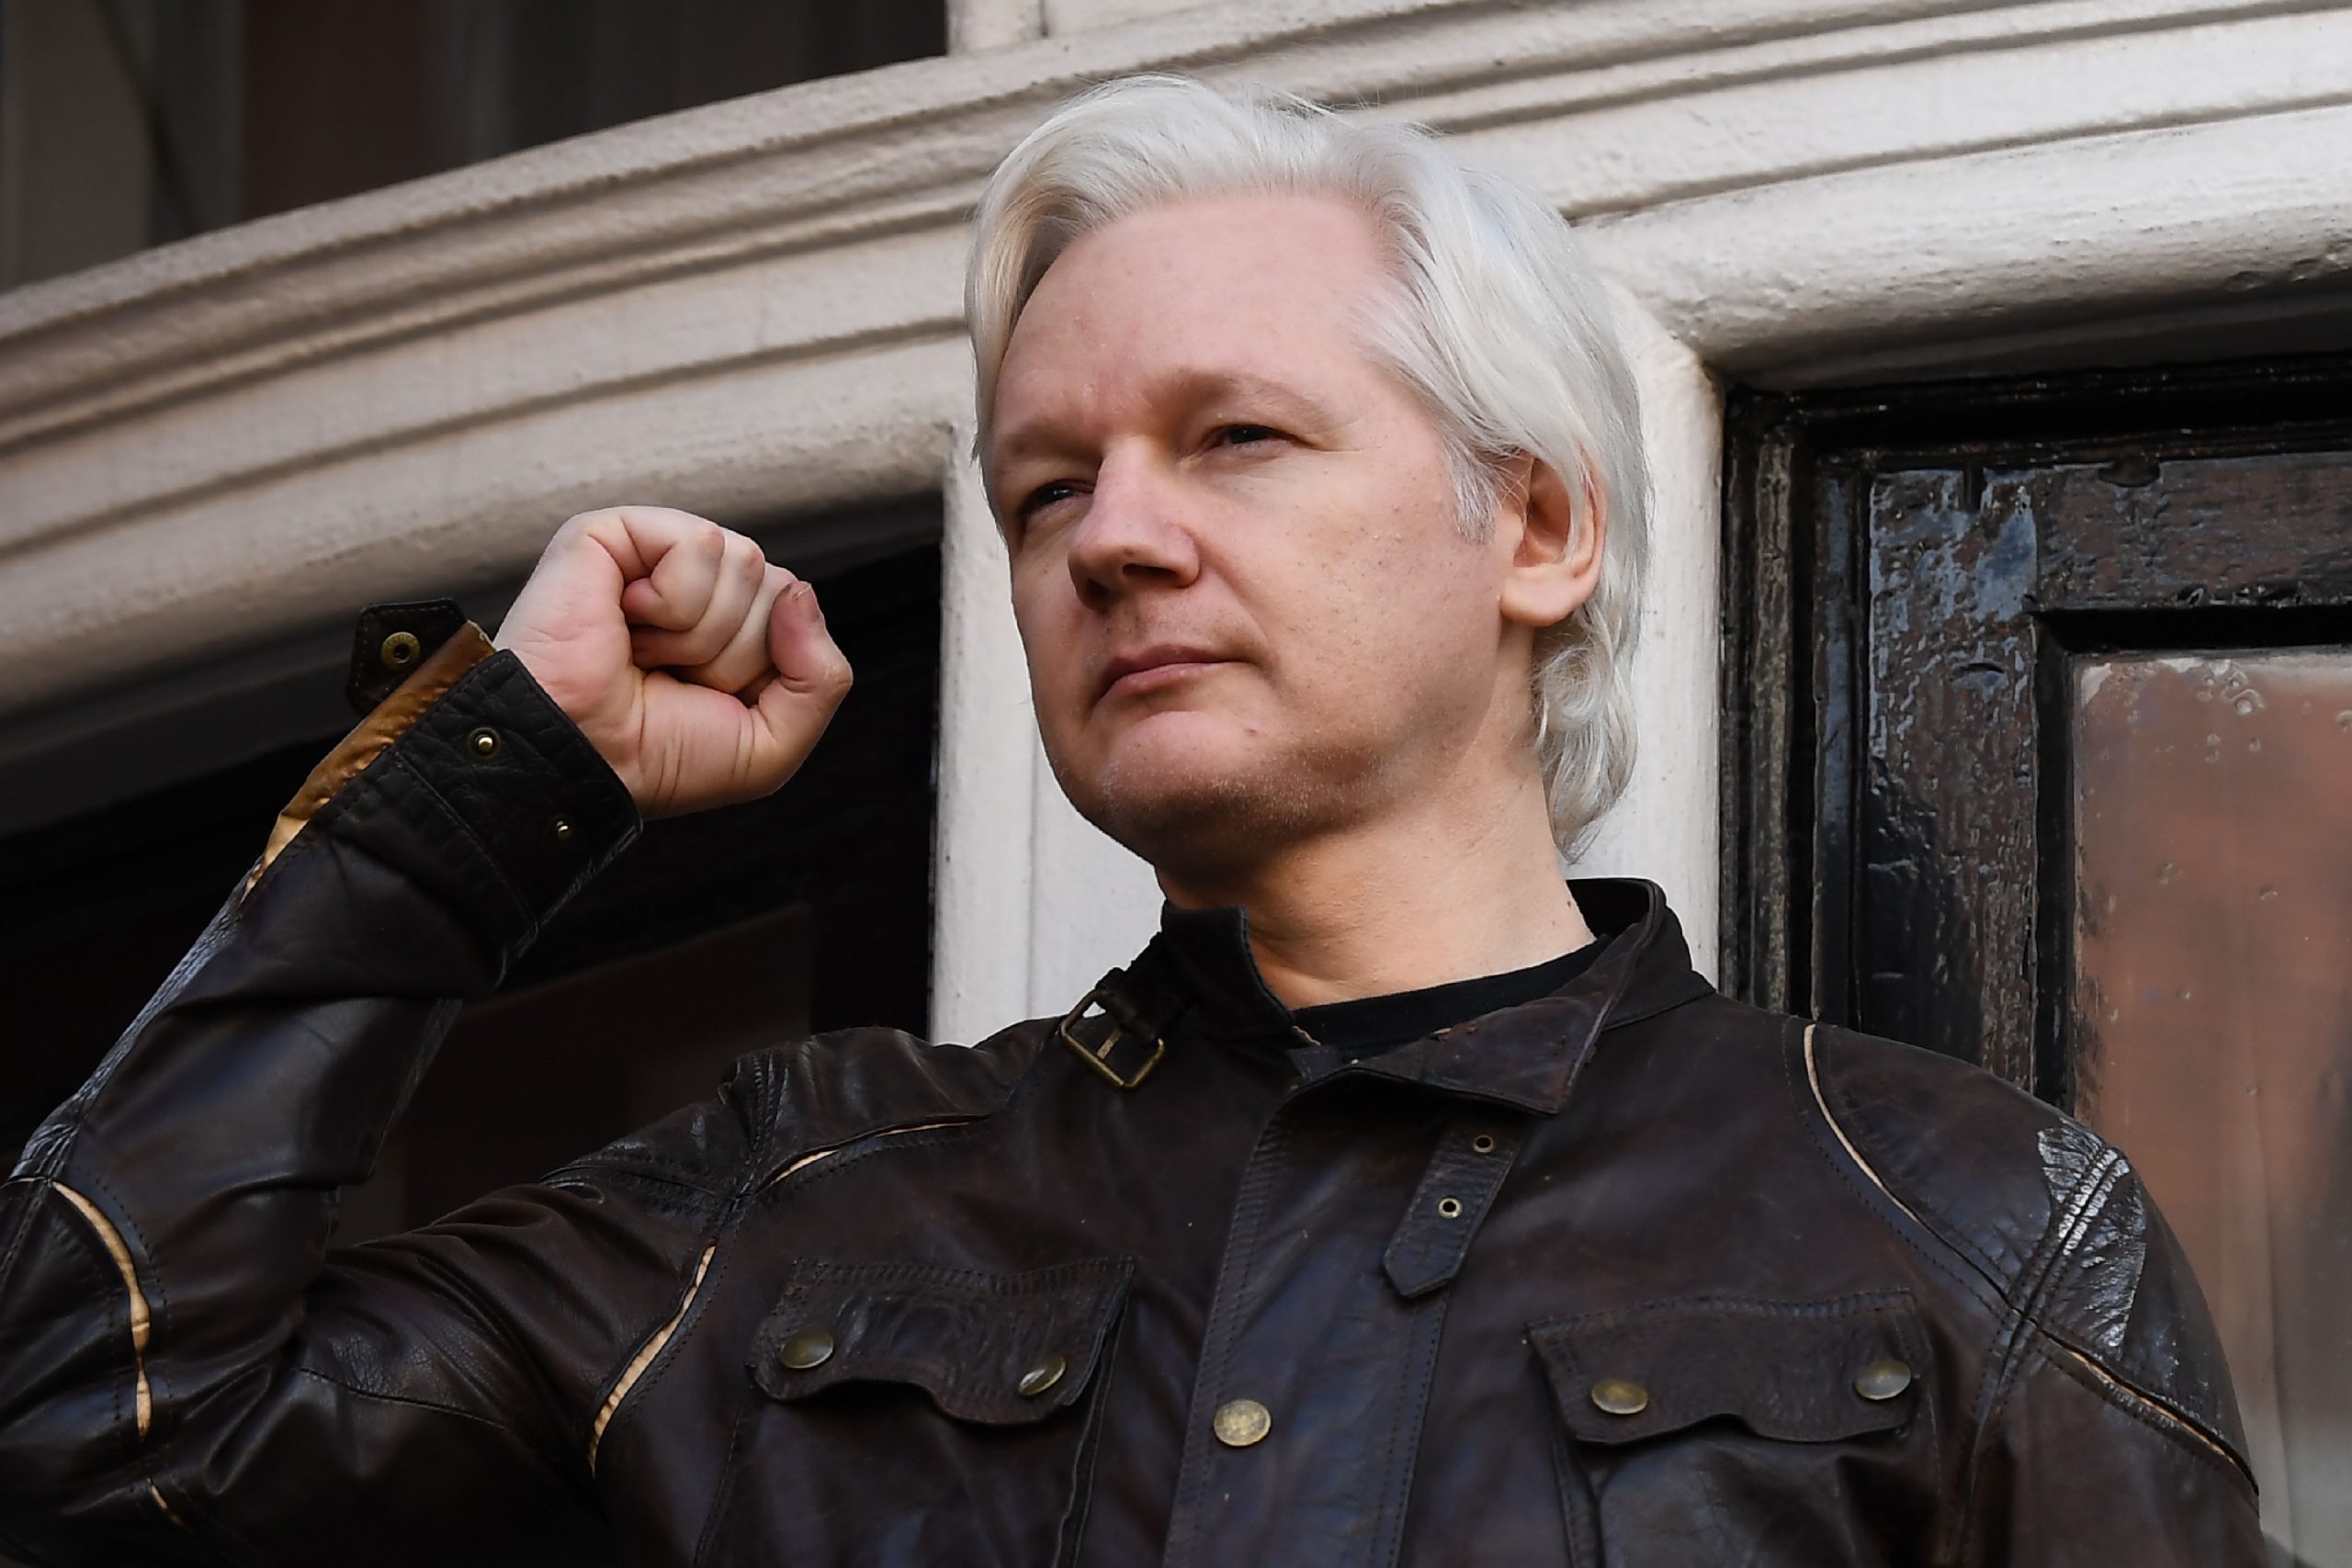 Justice Department files appeal for the extradition of WikiLeaks founder Julian Assange